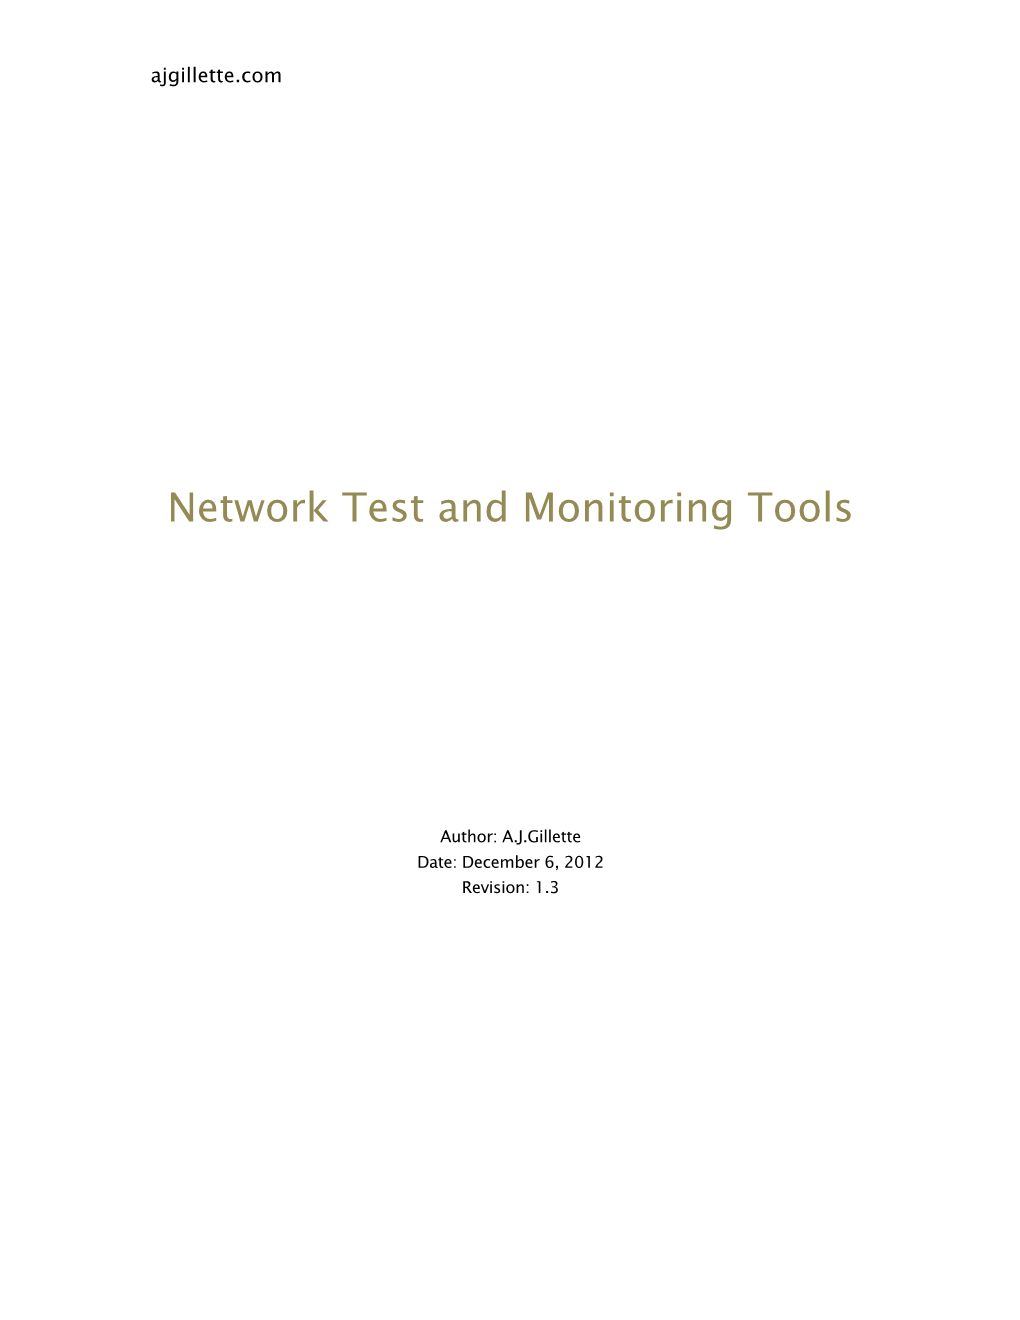 Network Test and Monitoring Tools